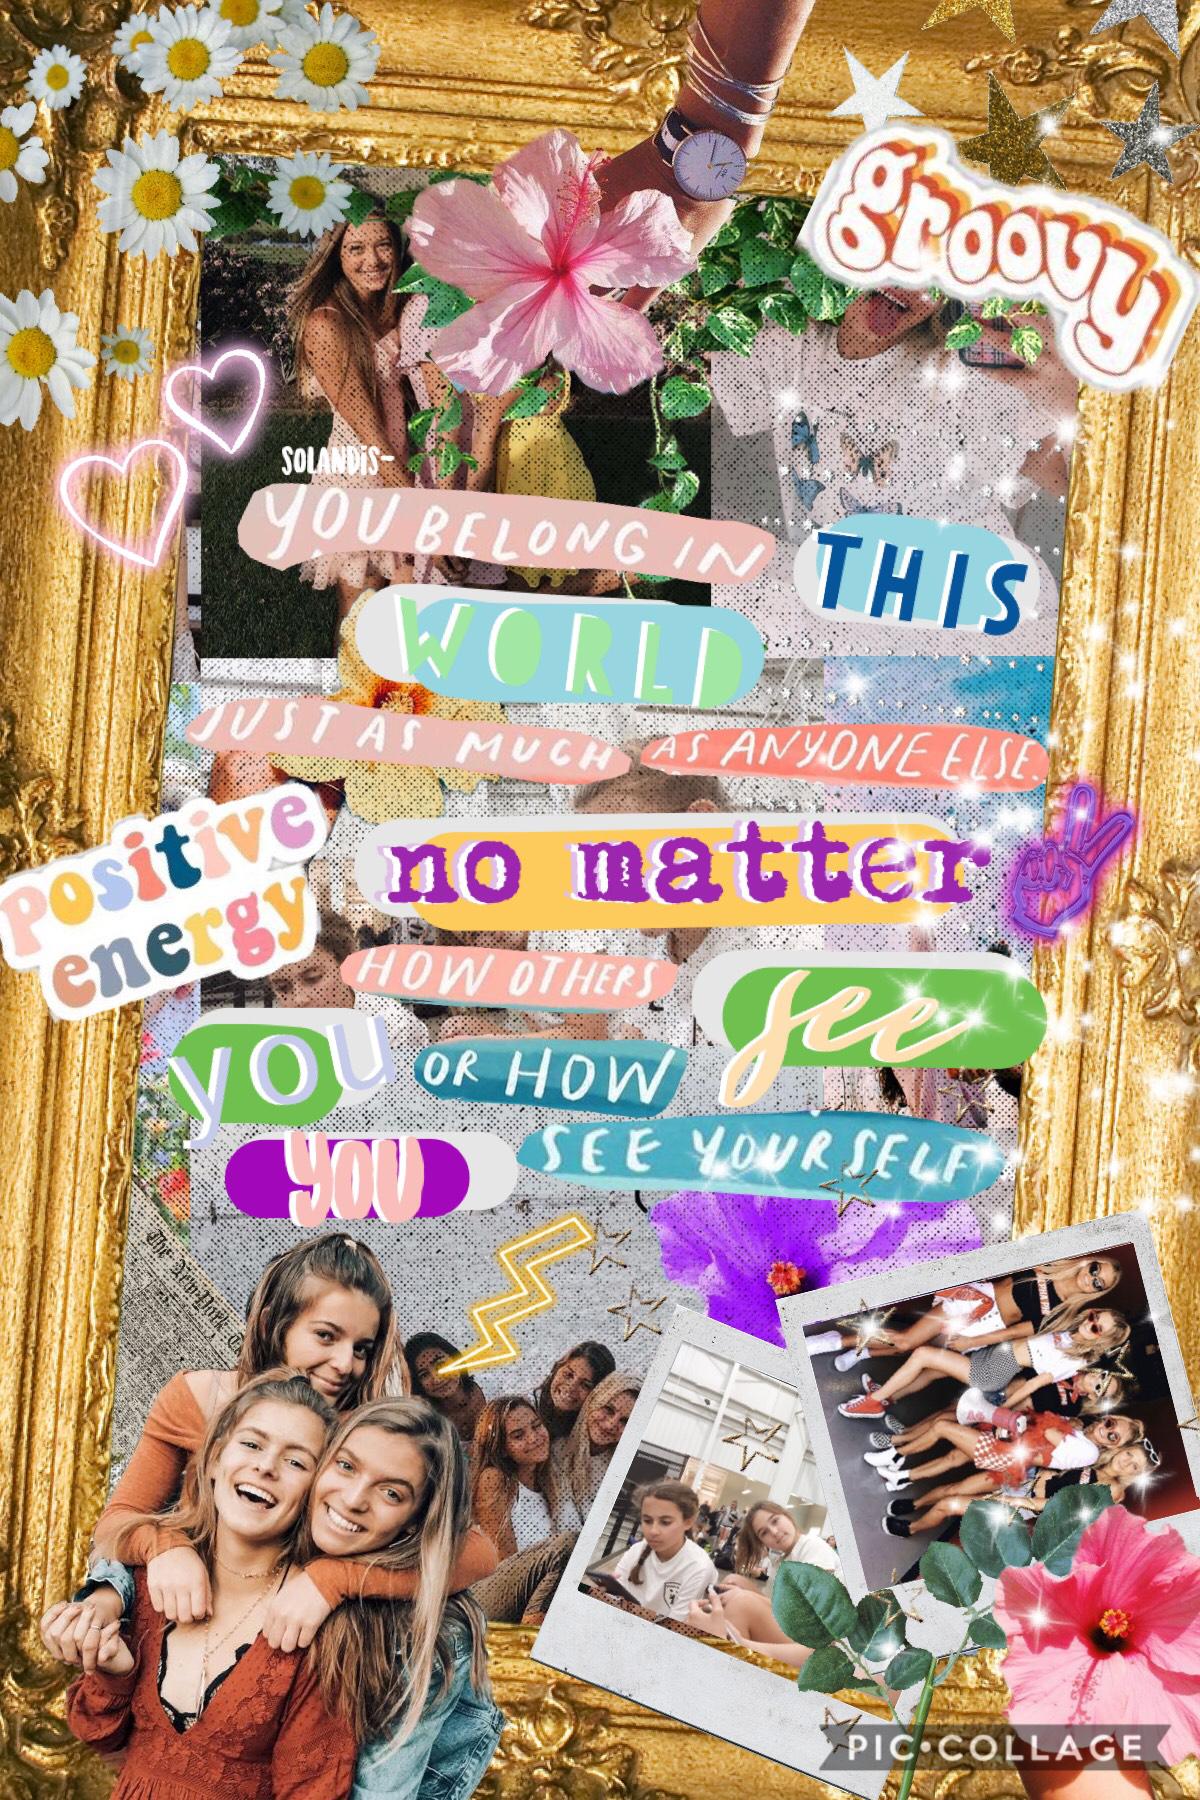 🌸✨Tappy✨🌸 4.9.19.

Hola ✨ Happy Tuesday 🌸 It’s Lenten cheat day for me, so might as well use it 💕 A little rusty on making collages, but I hope you like ♥️ Again thx for 1000 followers ☀️ Easter is soon! QOTD: pastel or neon AOTD: pastel